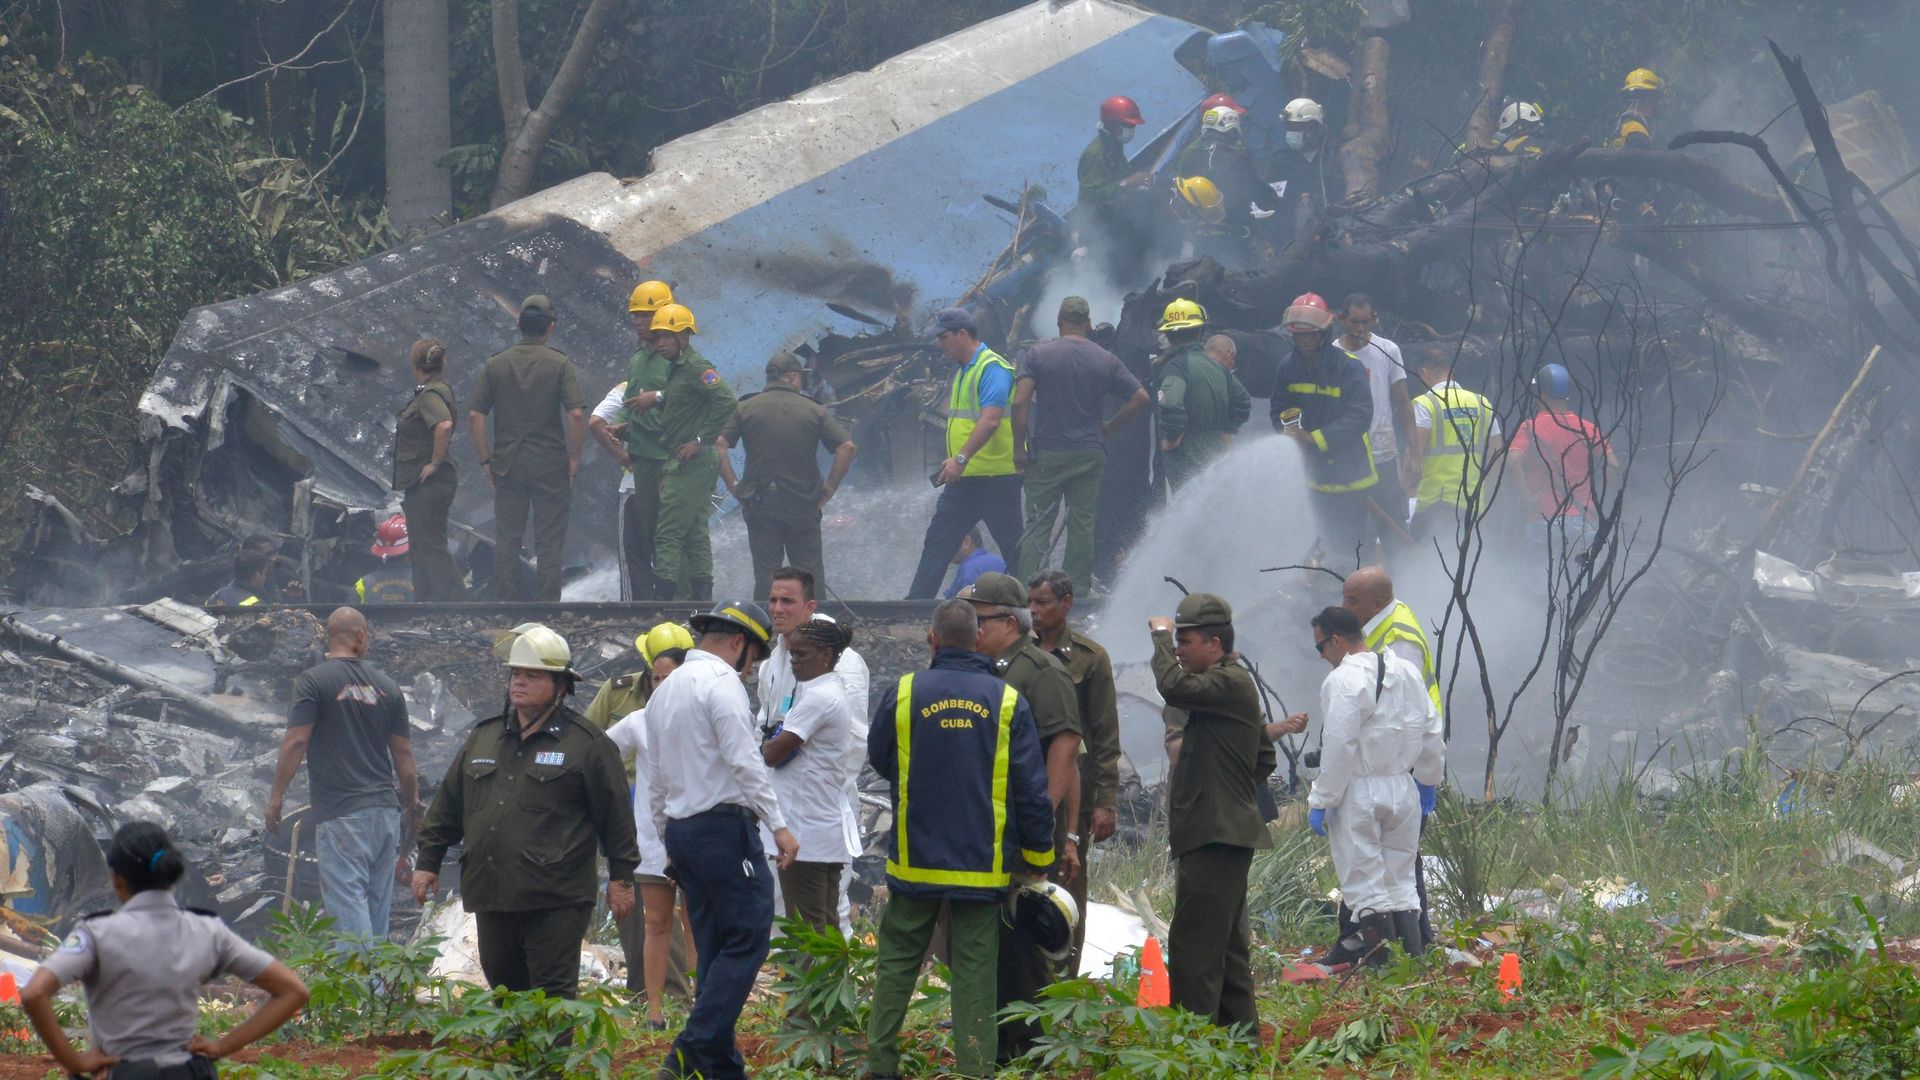 Rescue workers arrive to the scene of the plane crash close to the Havana Airport, in Cuba